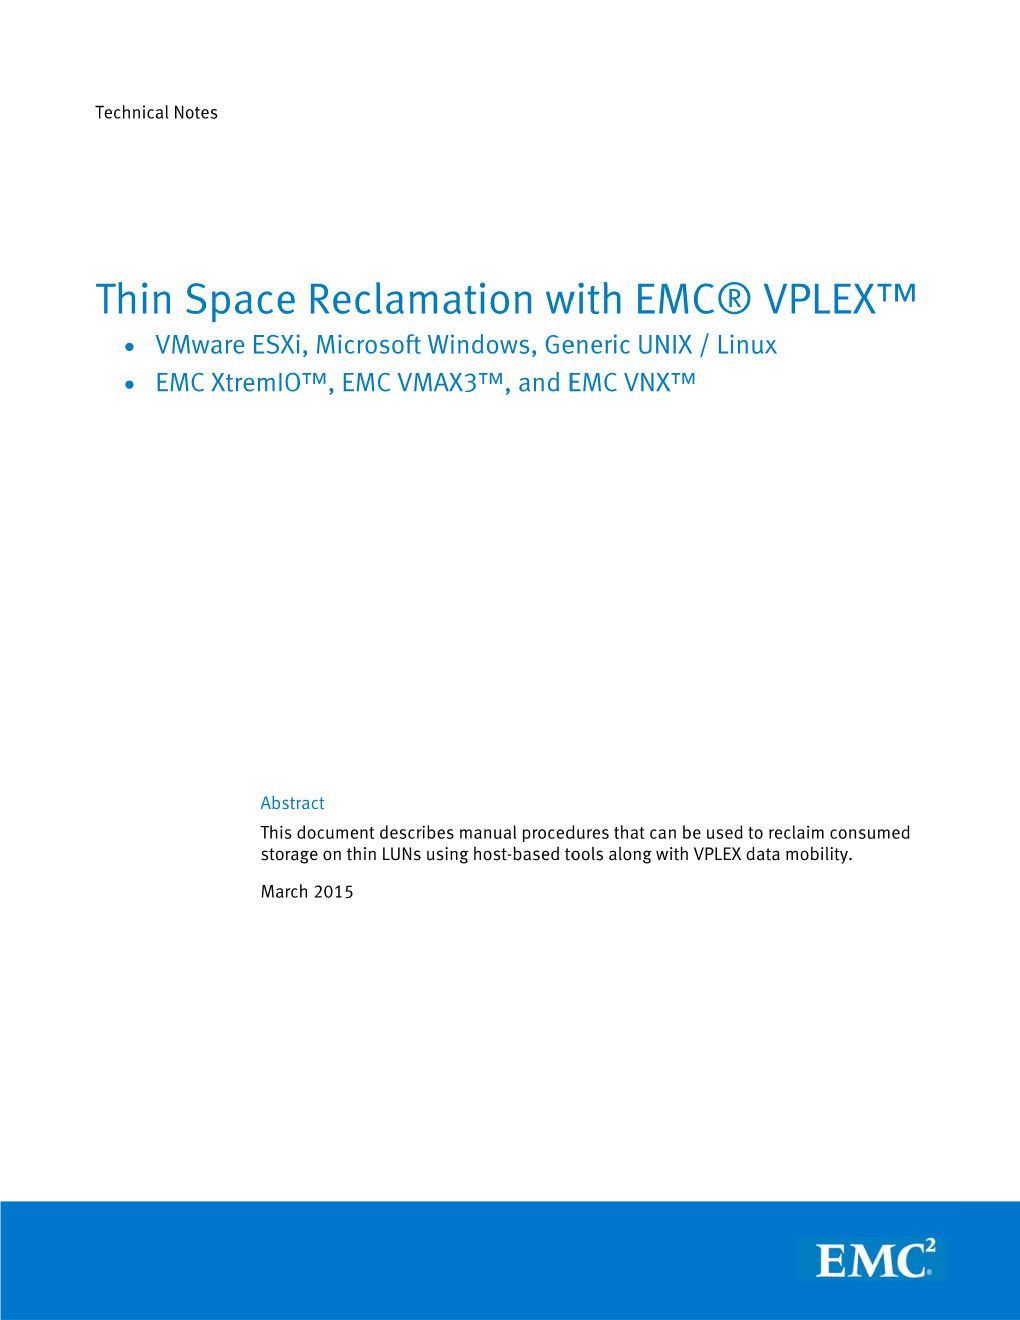 Thin Space Reclamation with EMC VPLEX Technical Notes Part Number H14055